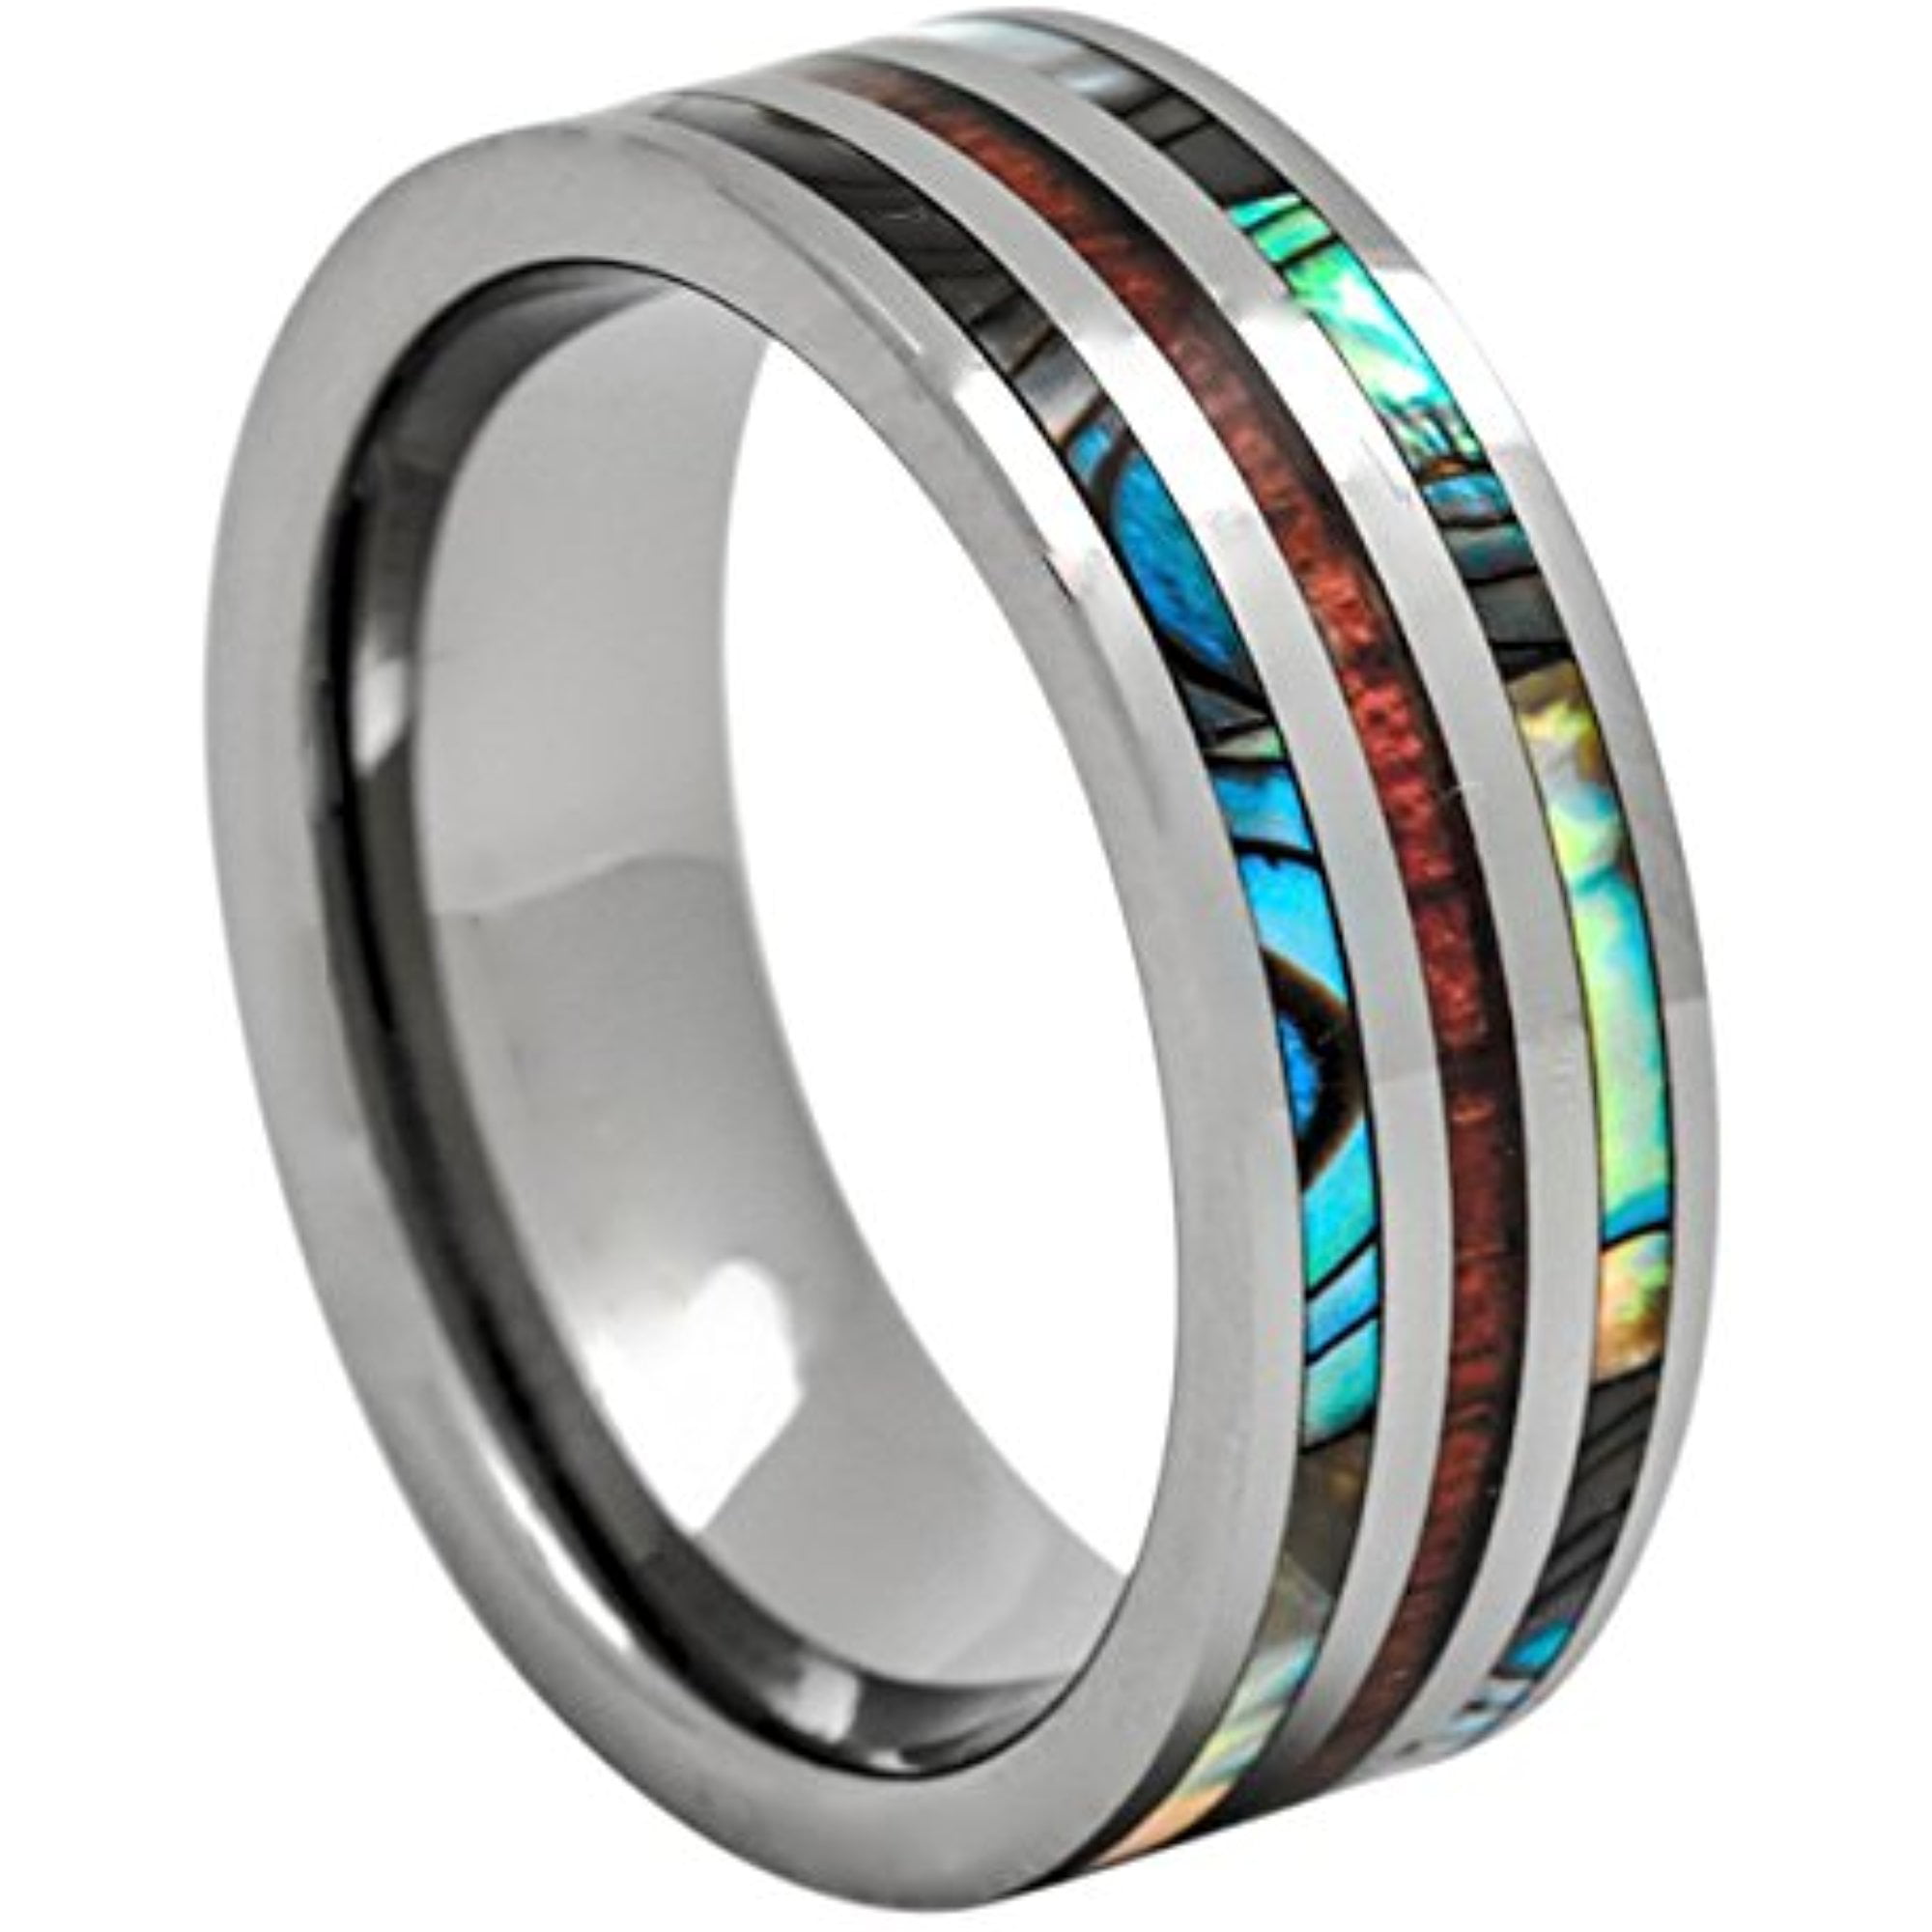 Tungsten Hawaiian Koa Wood and Abalone Ring 8mm Comfort Fit Band Flat Top Size 6 to 15 (9)